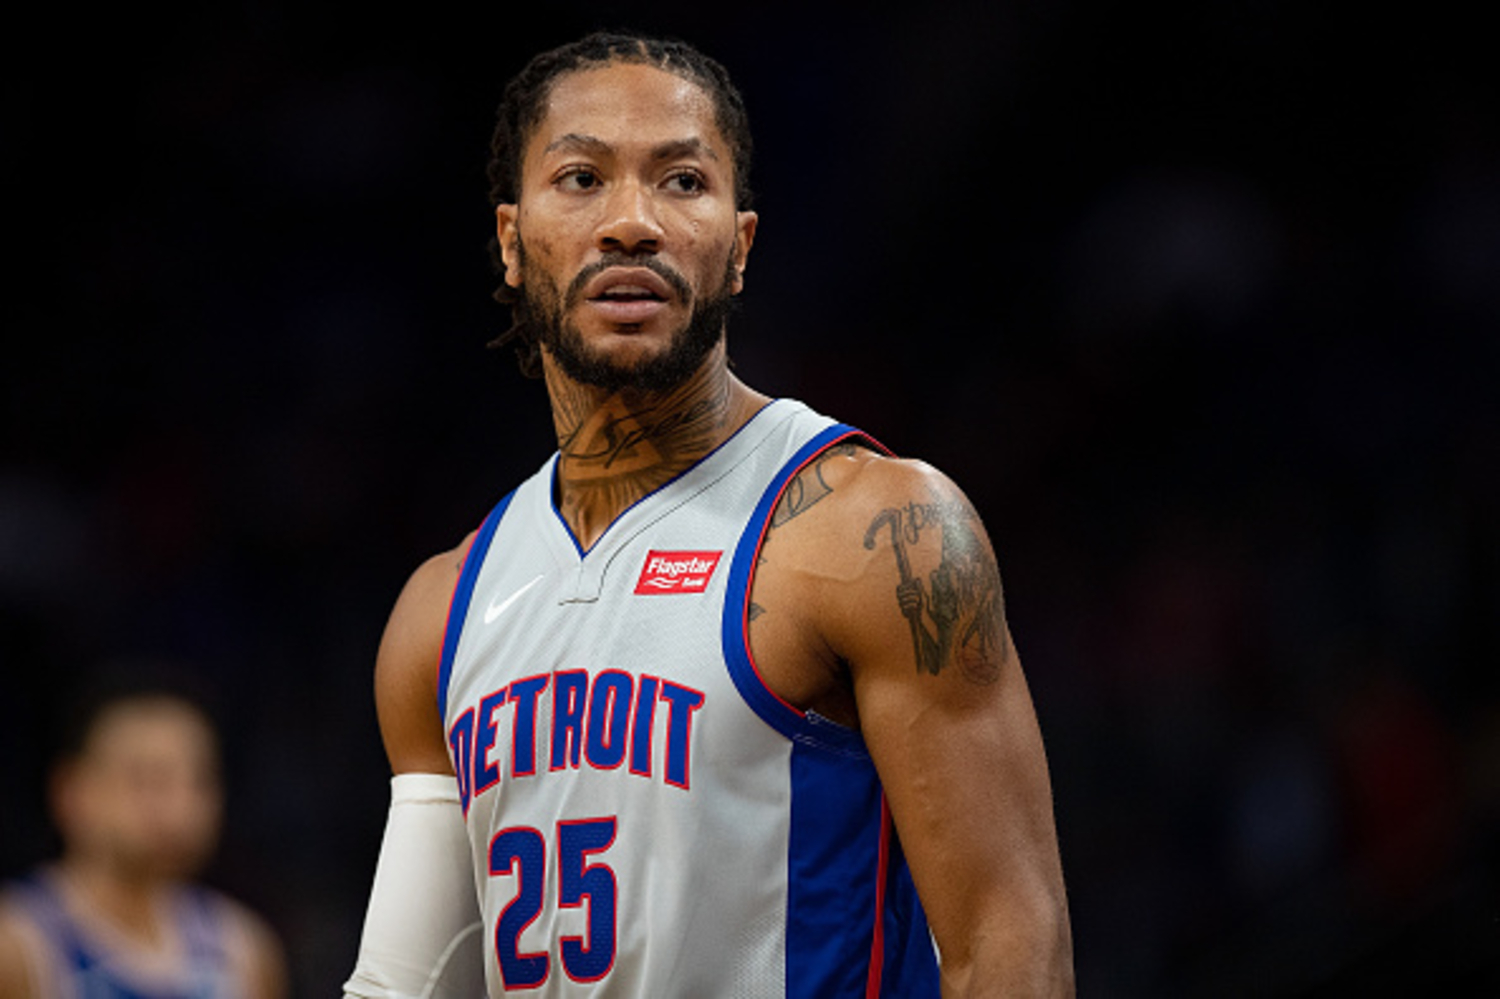 Derrick Rose Will Have the Opportunity to Mentor a Talented Young Guard